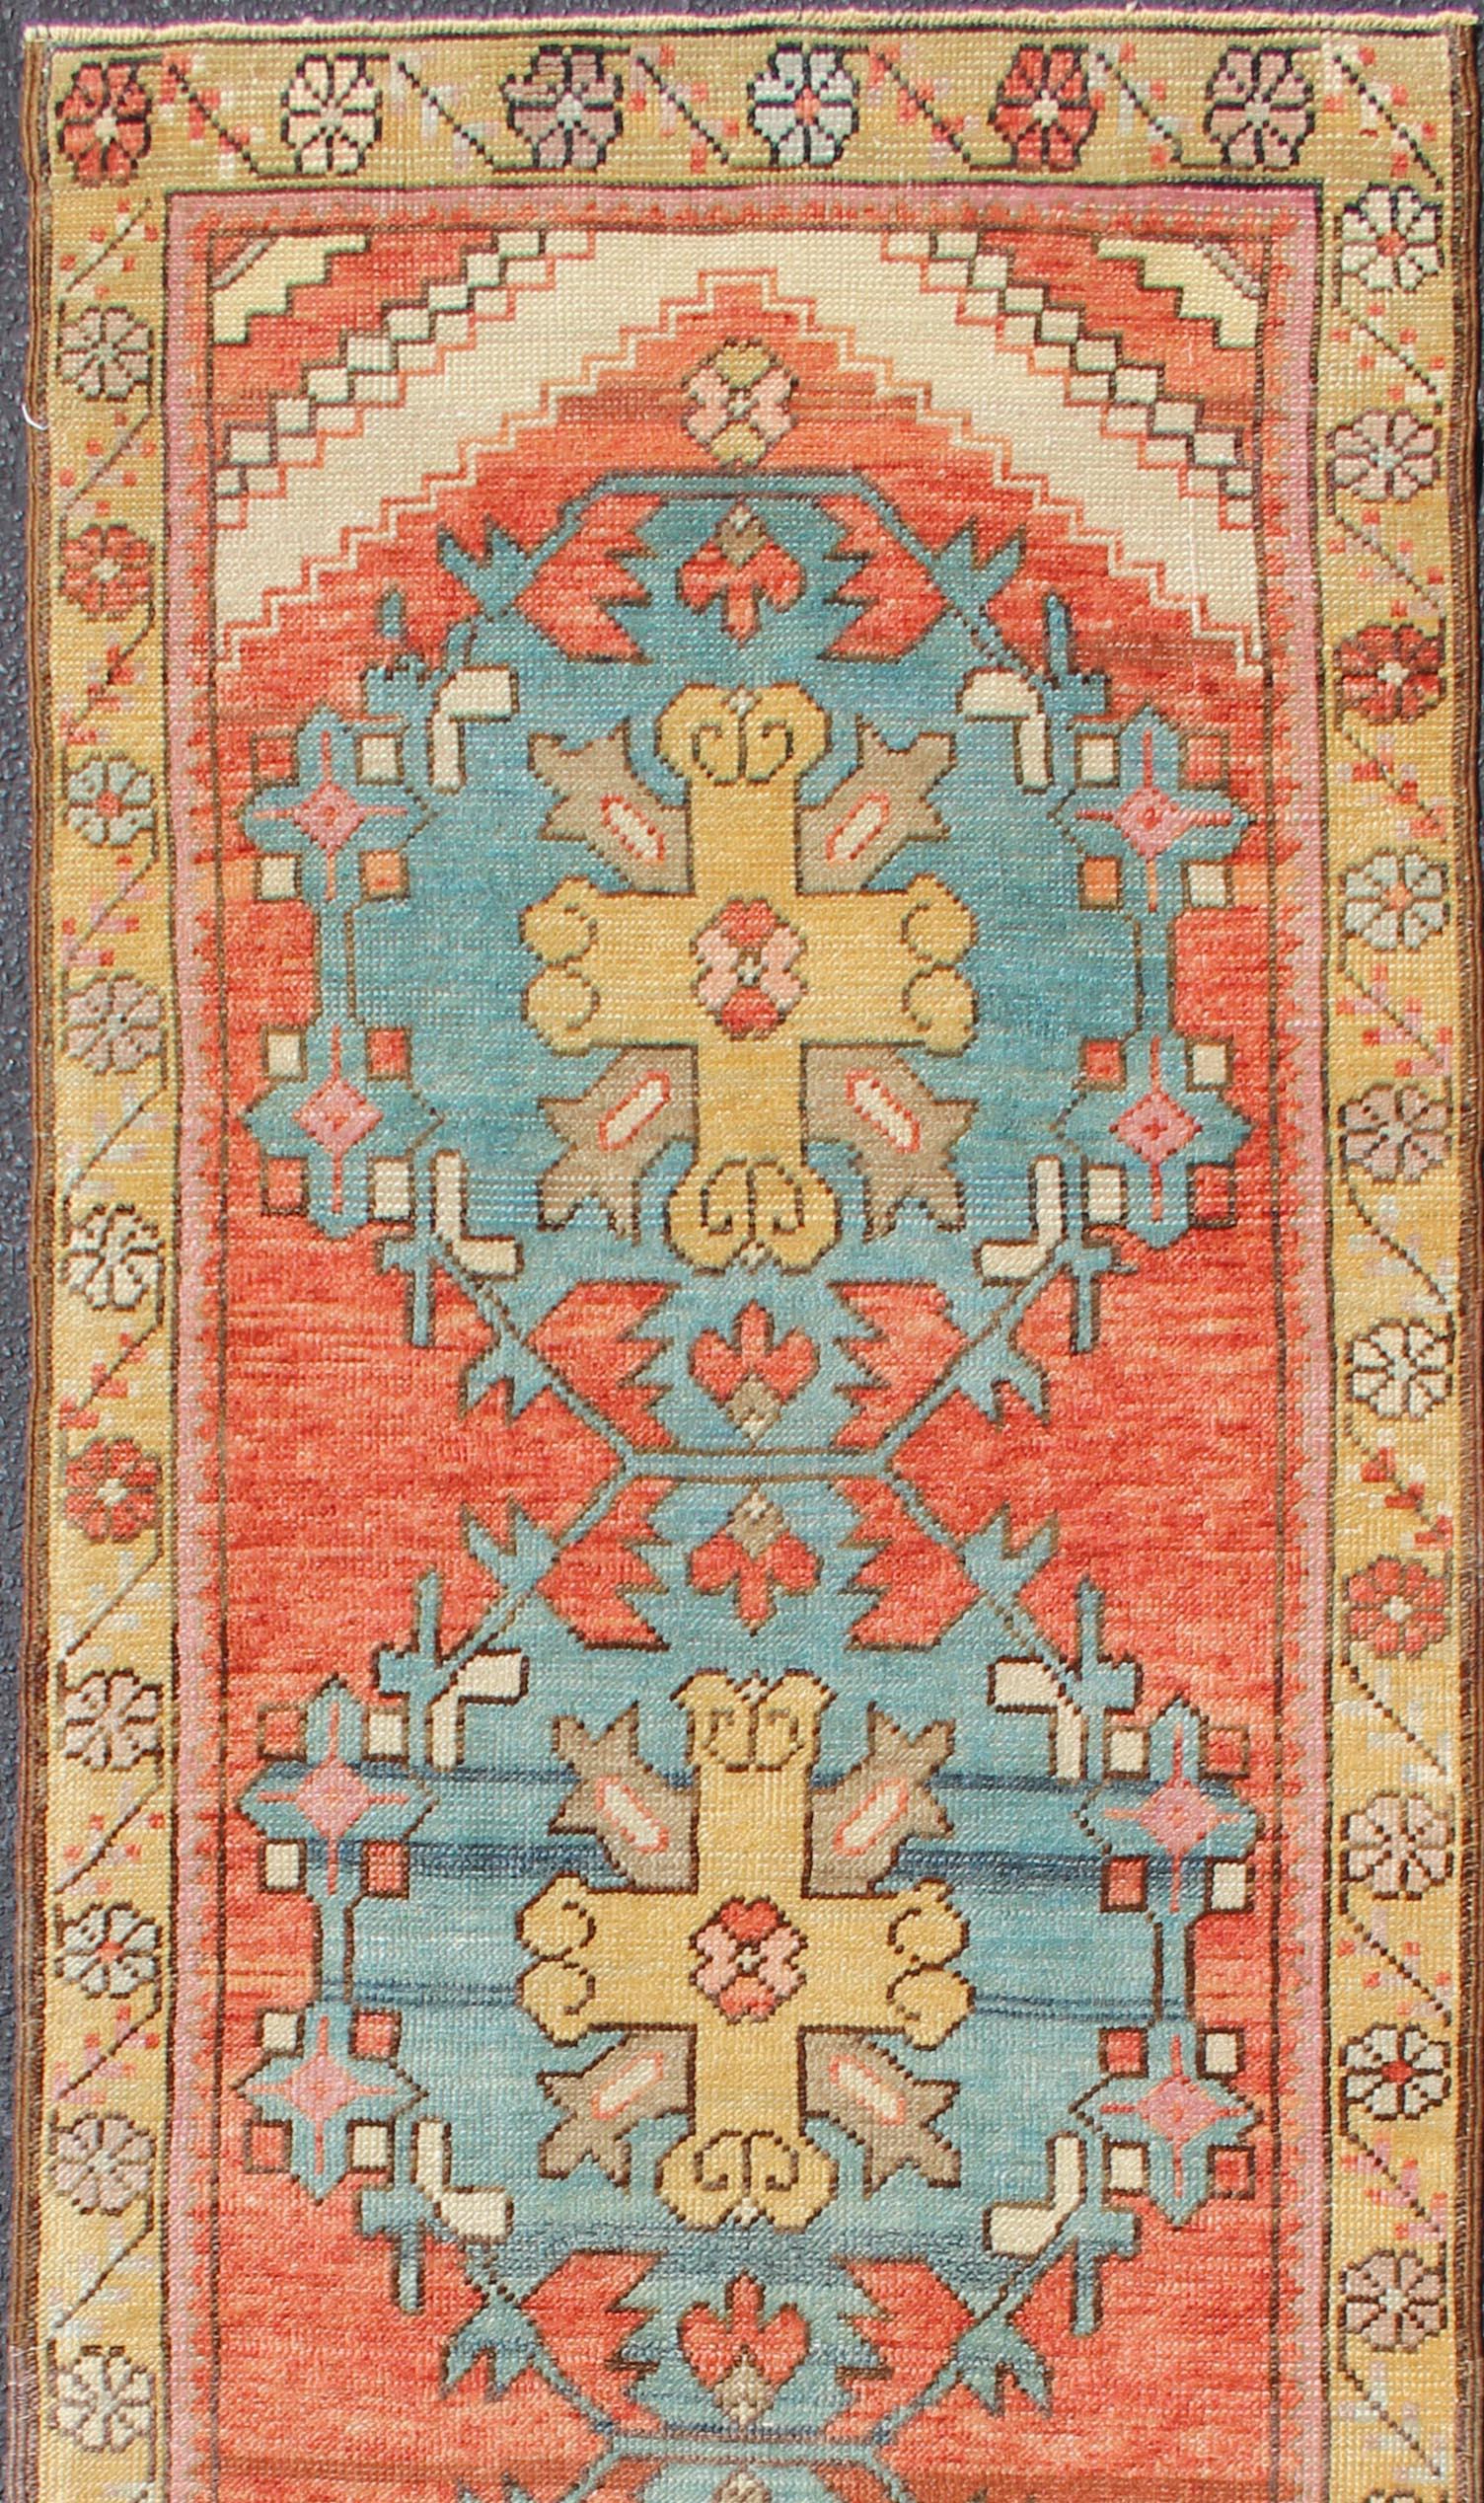 Colorful Turkish Antique Oushak runner in Terracotta, Yellow & teal Blue , rug EN-179659, country of origin / type: Turkey / Oushak, circa 1930.

This vintage Turkish Oushak runner features four layered medallions expanding across the central field.